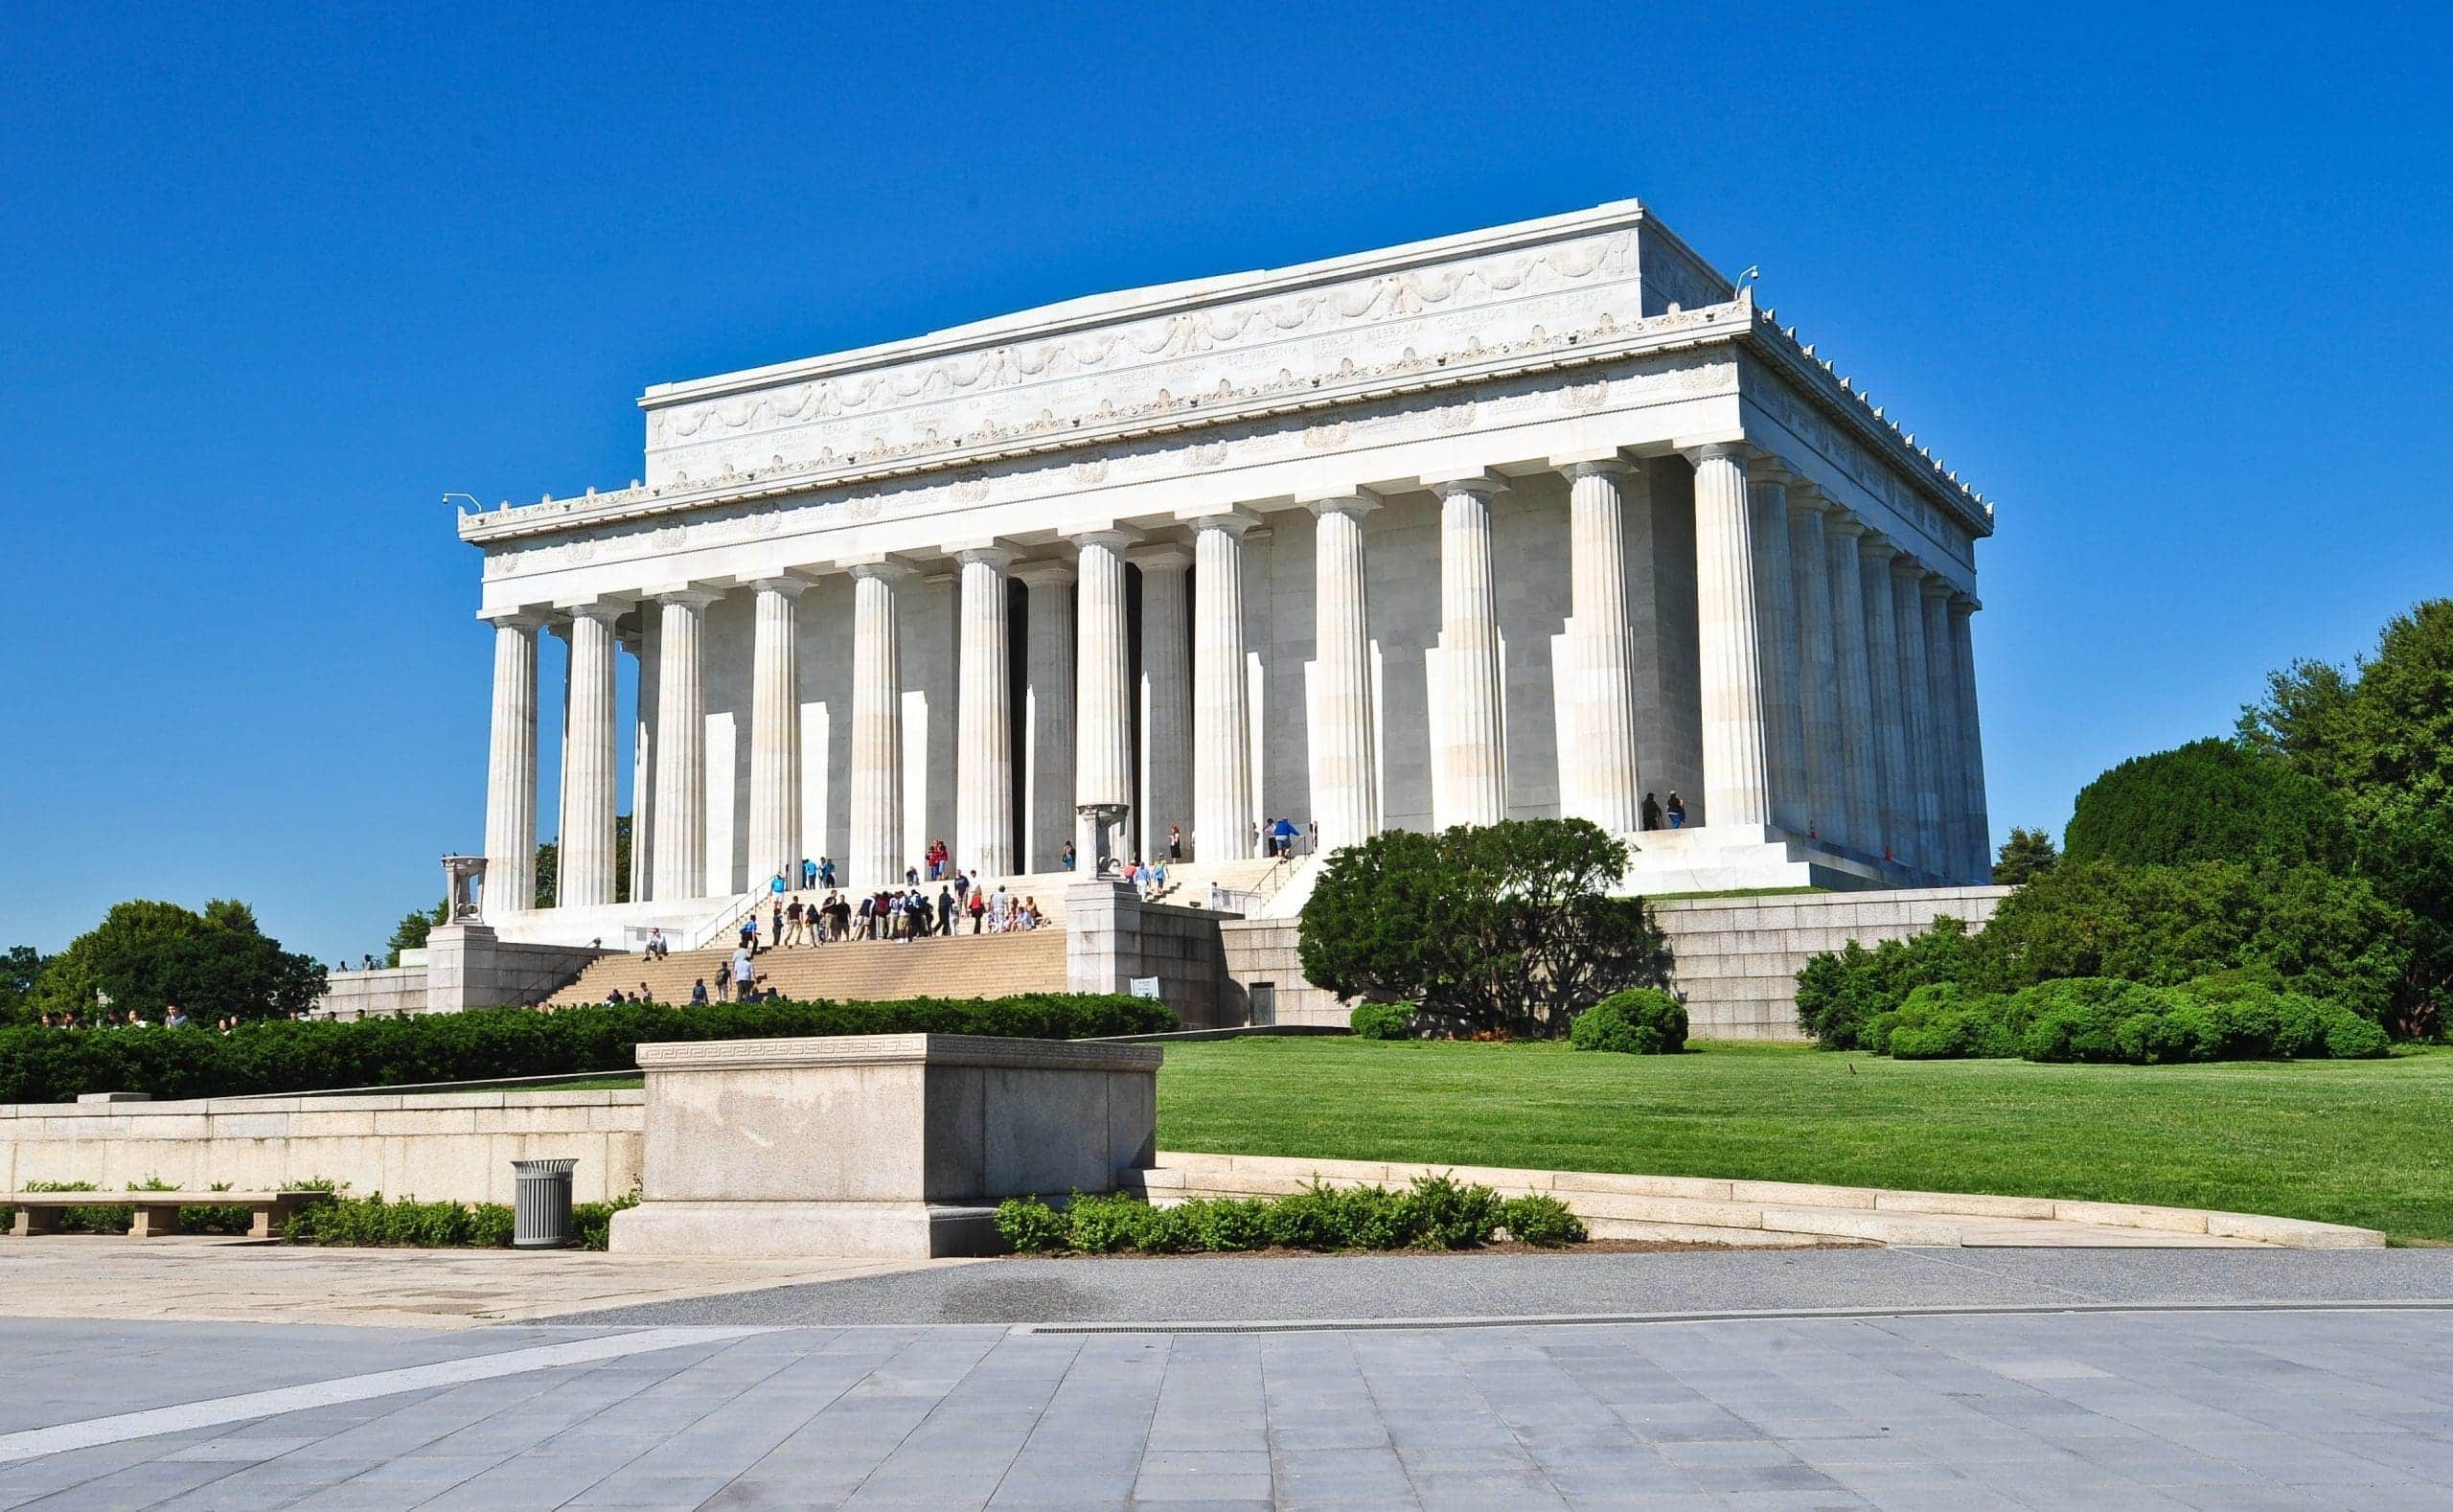 Exciting Washington DC Trivia Tour for kids, teens & young adults